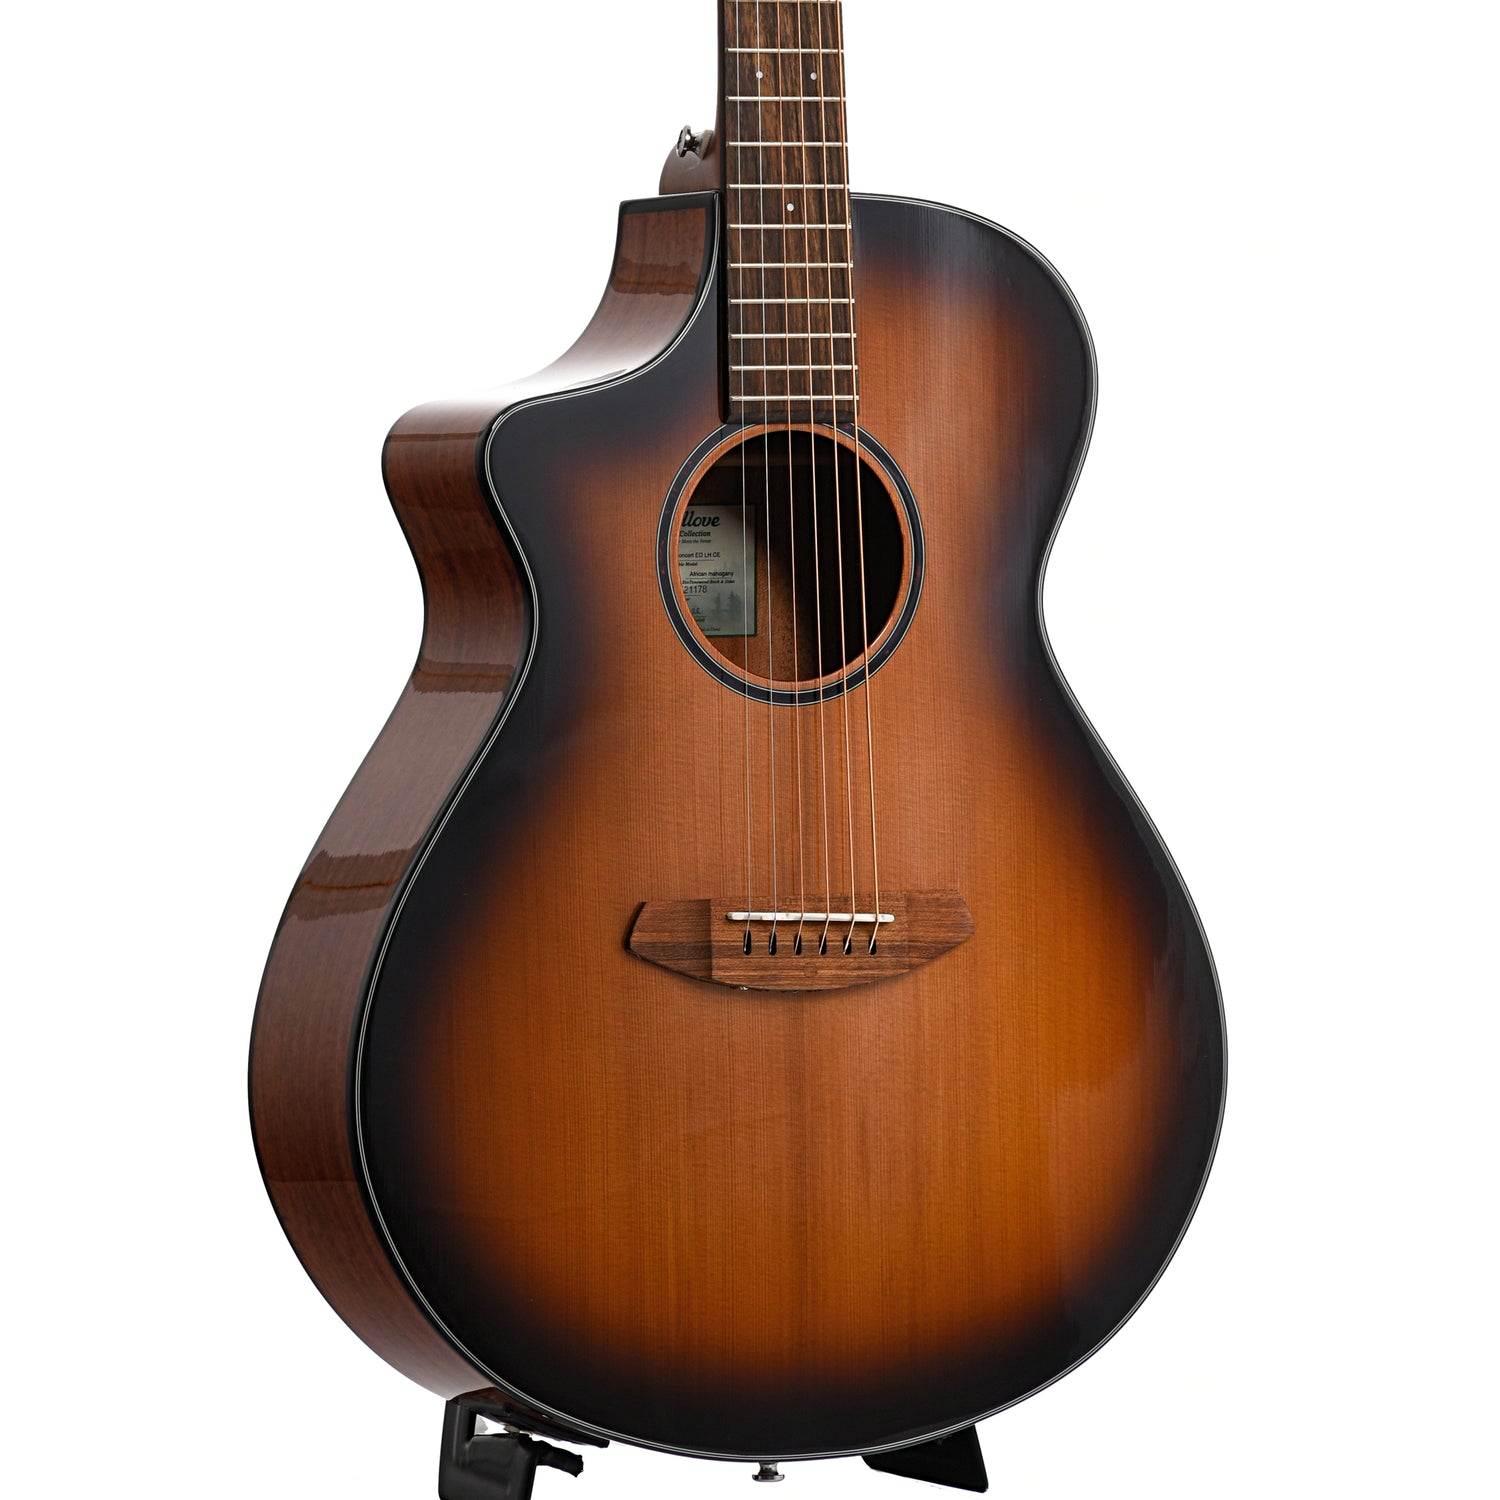 Image 5 of Breedlove Discovery S Concert Edgeburst Left-handed CE Red Cedar-African Mahogany Acoustic-Electric Guitar - SKU# DSCN44LCERCAM : Product Type Flat-top Guitars : Elderly Instruments